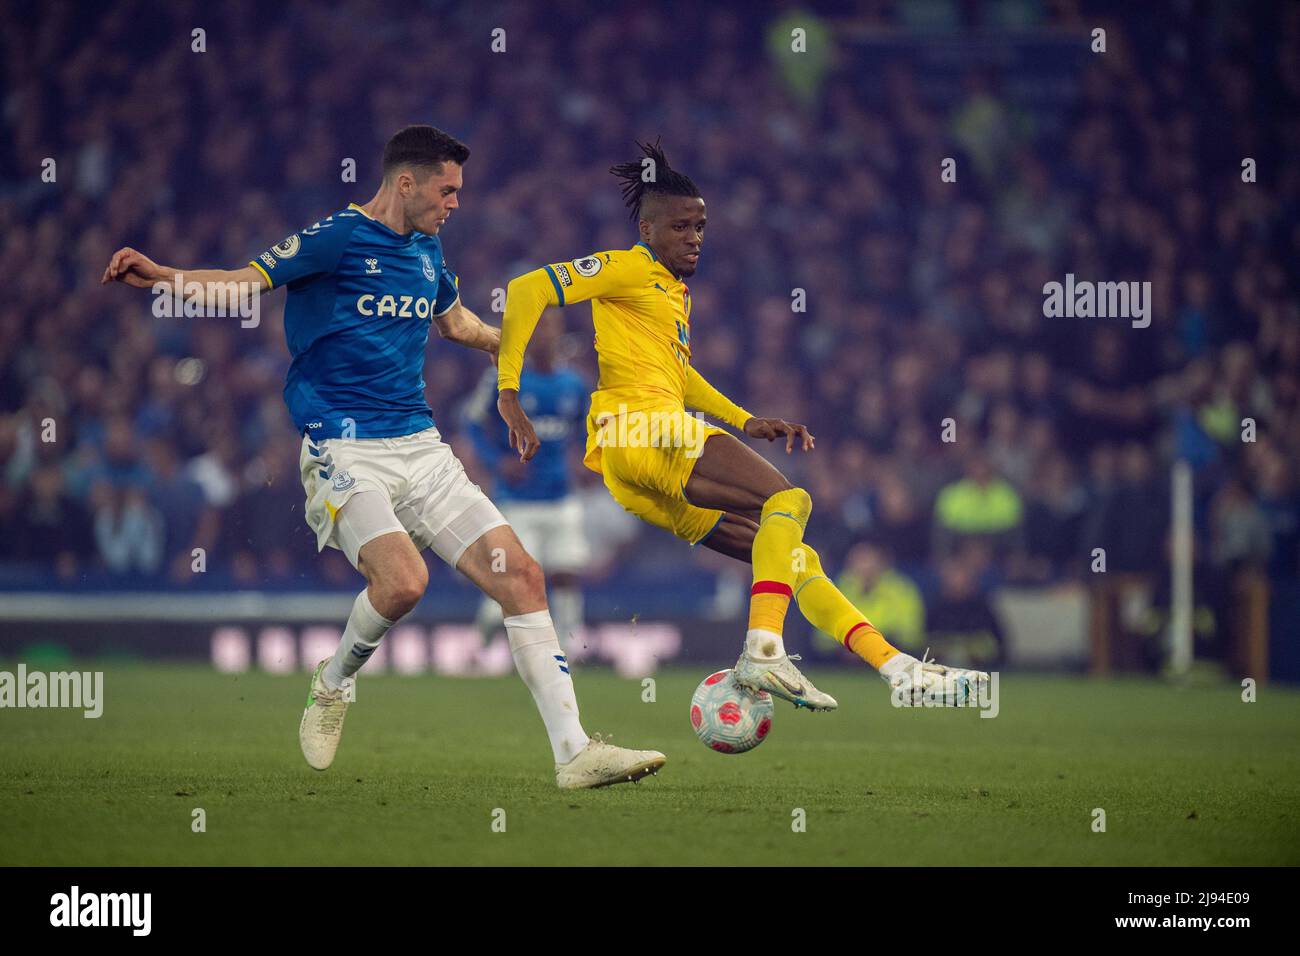 LIVERPOOL, ENGLAND - MAY 19: Michael Keane, Wilfried Zaha during the Premier League match between Everton and Crystal Palace at Goodison Park on May 19, 2022 in Liverpool, United Kingdom. (Photo by Sebastian Frej) Stock Photo